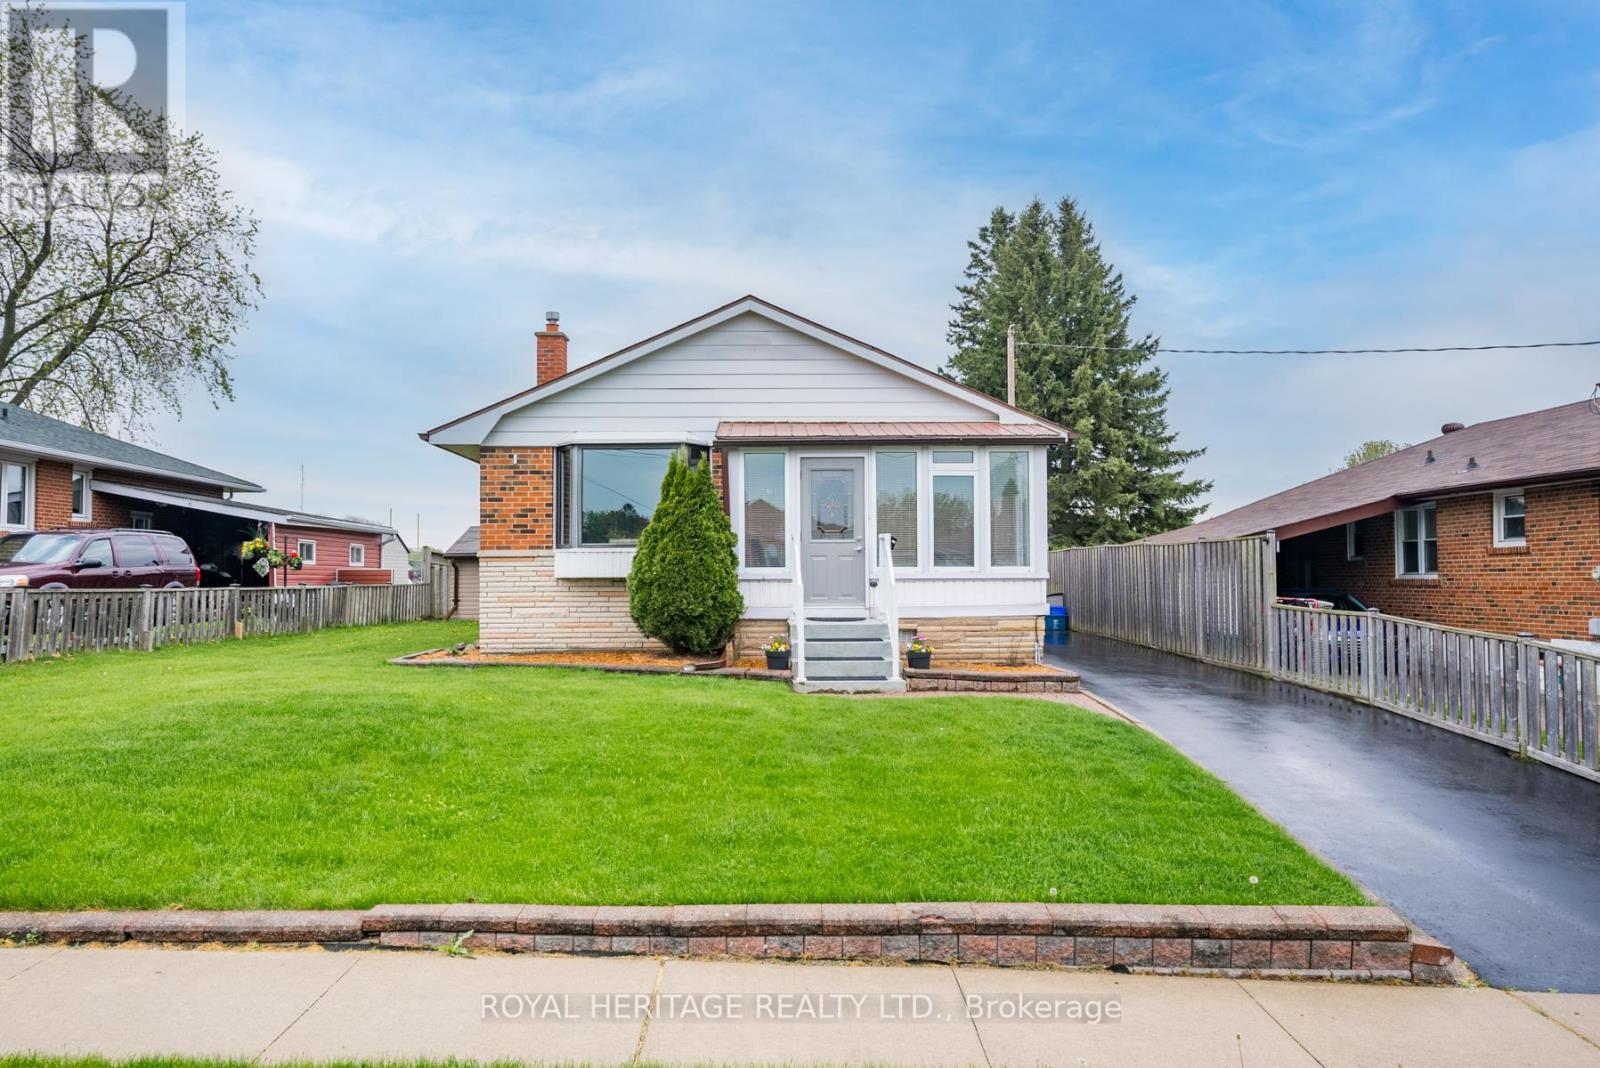 717 NEWMAN CRESCENT, whitby, Ontario